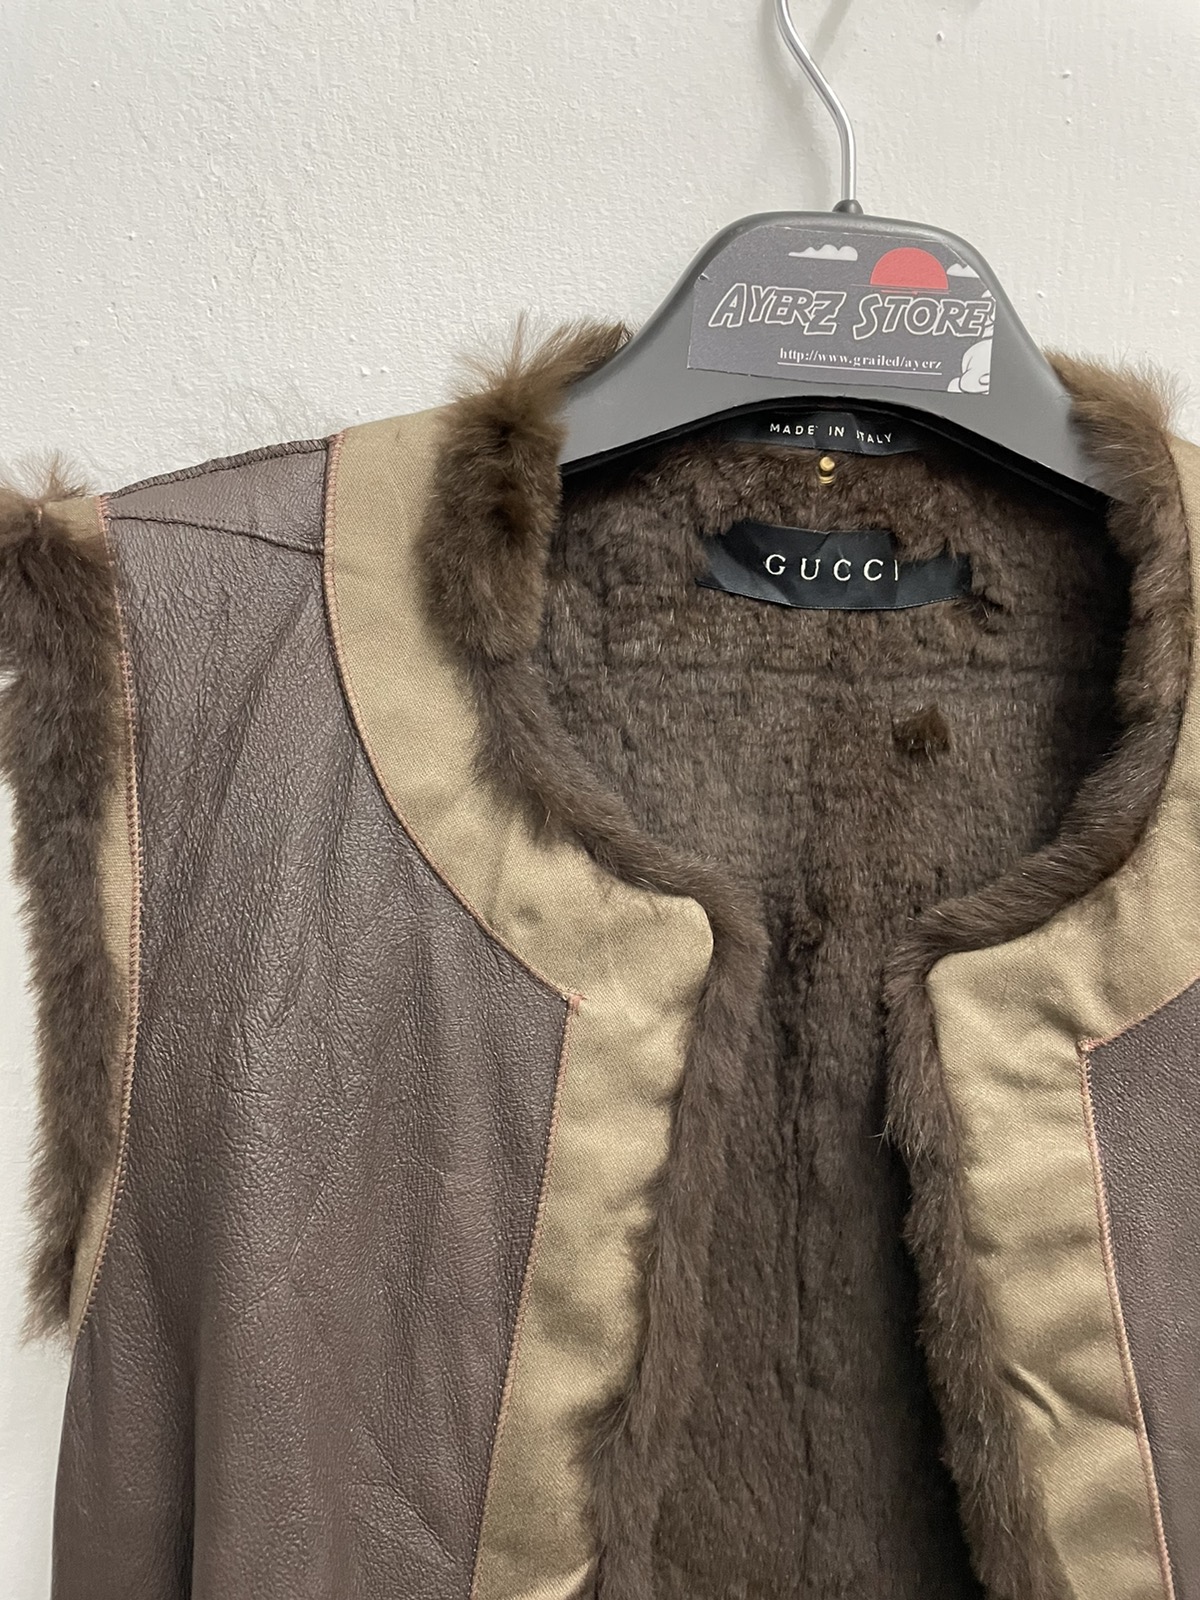 Gucci The Natural Lapin Fur Leather Vest Jackets Size 38 - 3